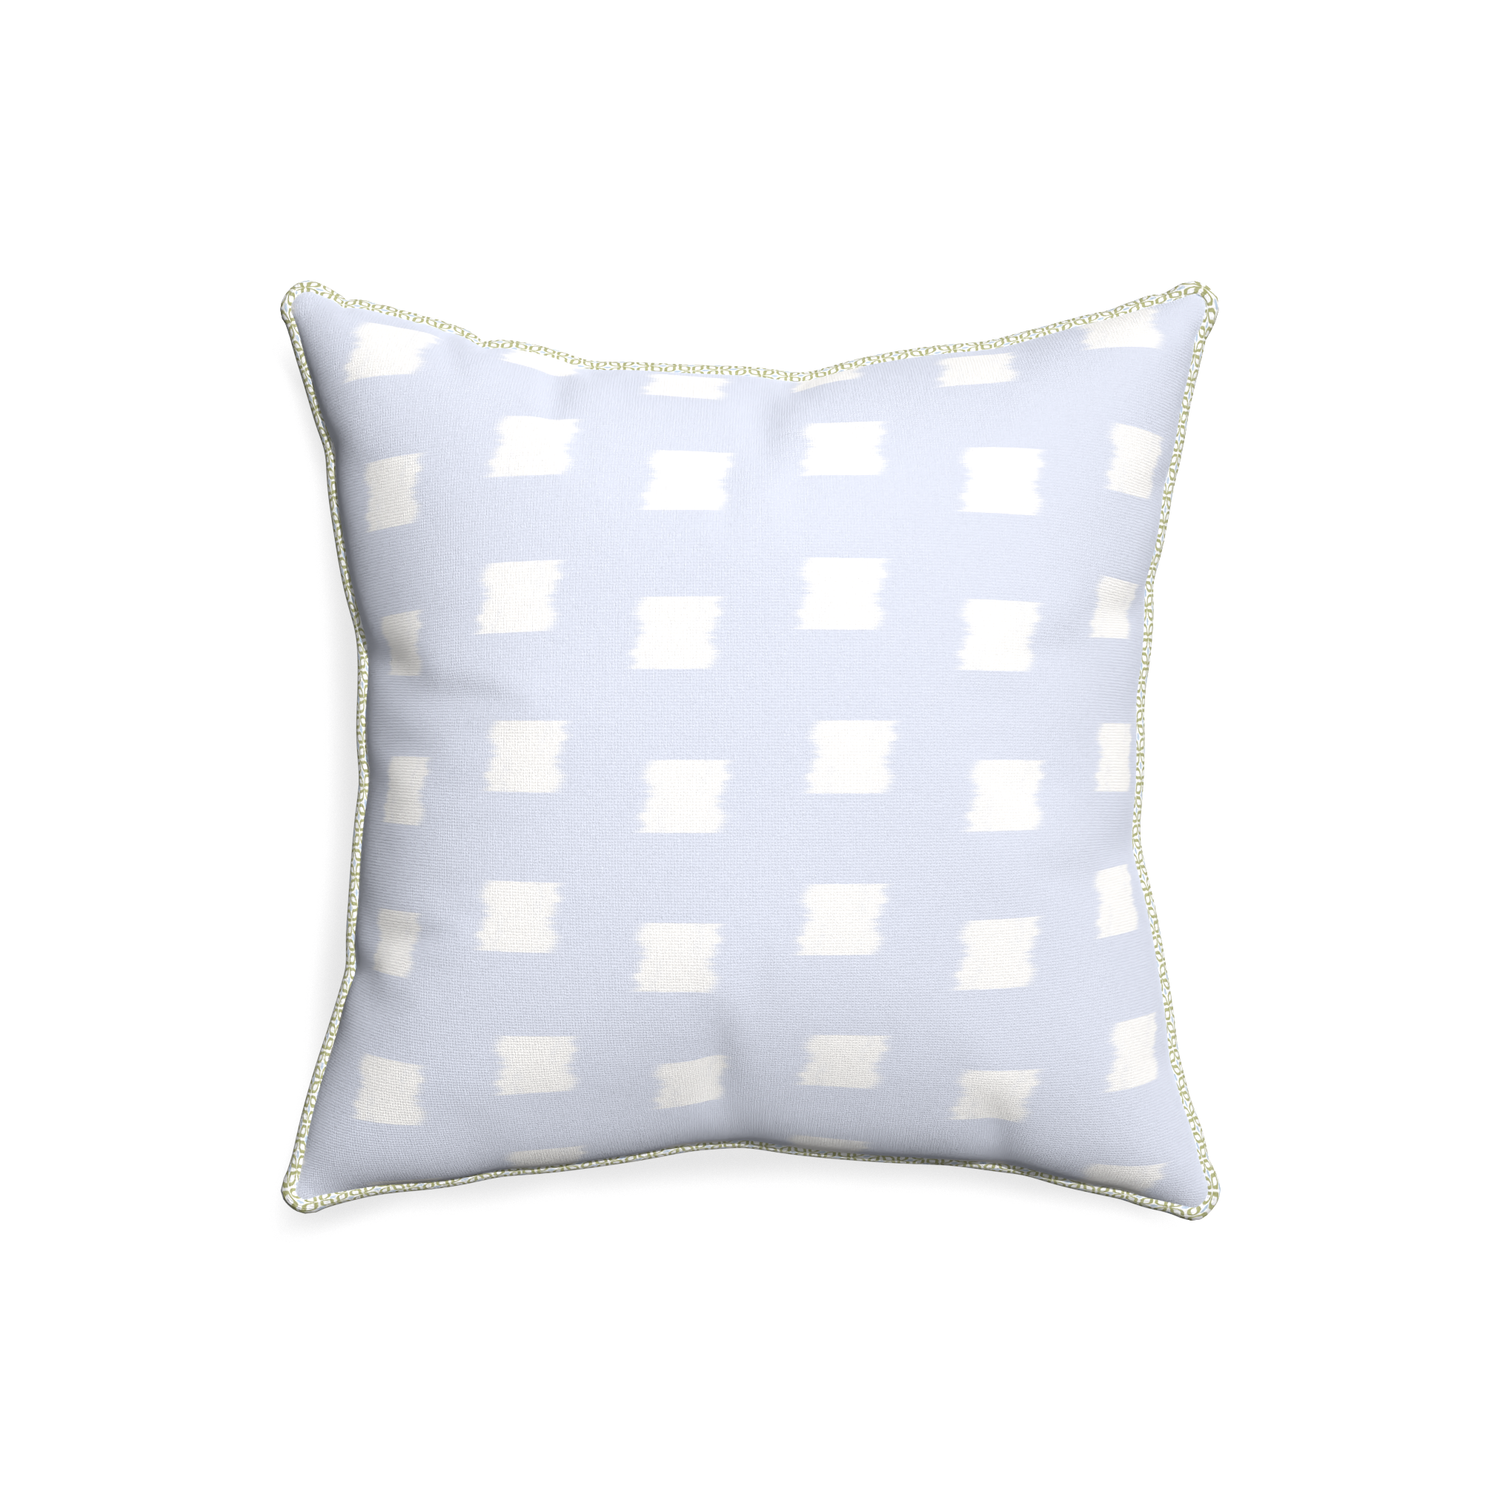 20-square denton custom sky blue patternpillow with l piping on white background